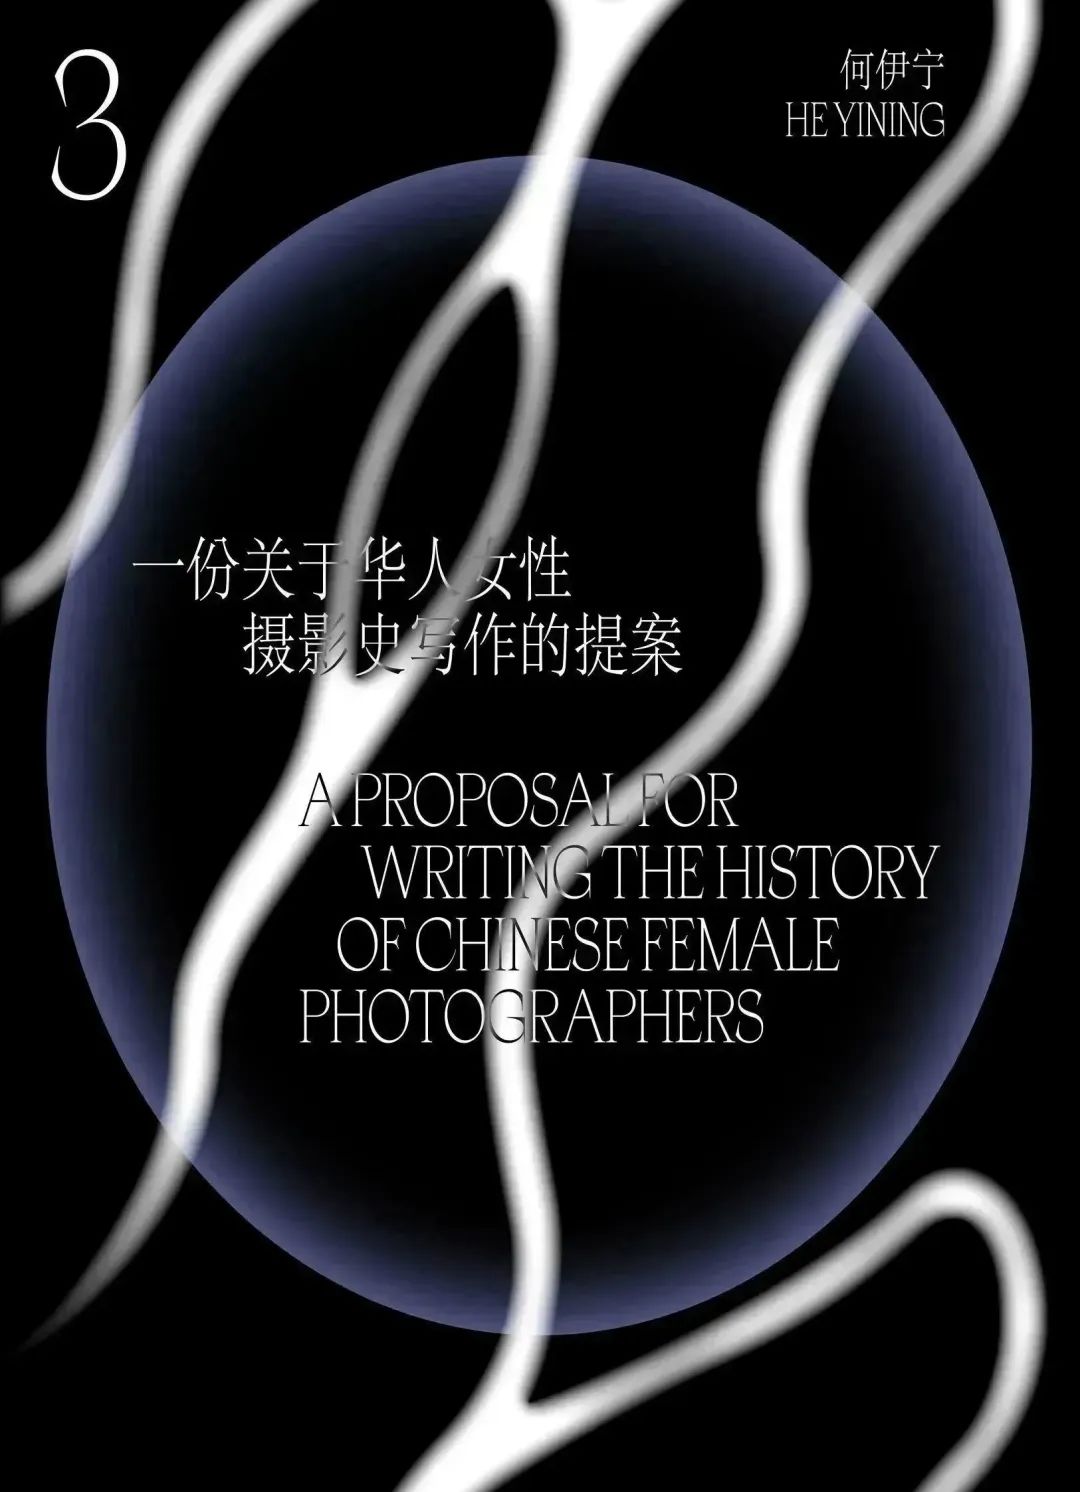 A Proposal for Writing the History of Chinese Female Photographers (article) 一份关于华裔女性摄影史写作的提案 （杂志文章）